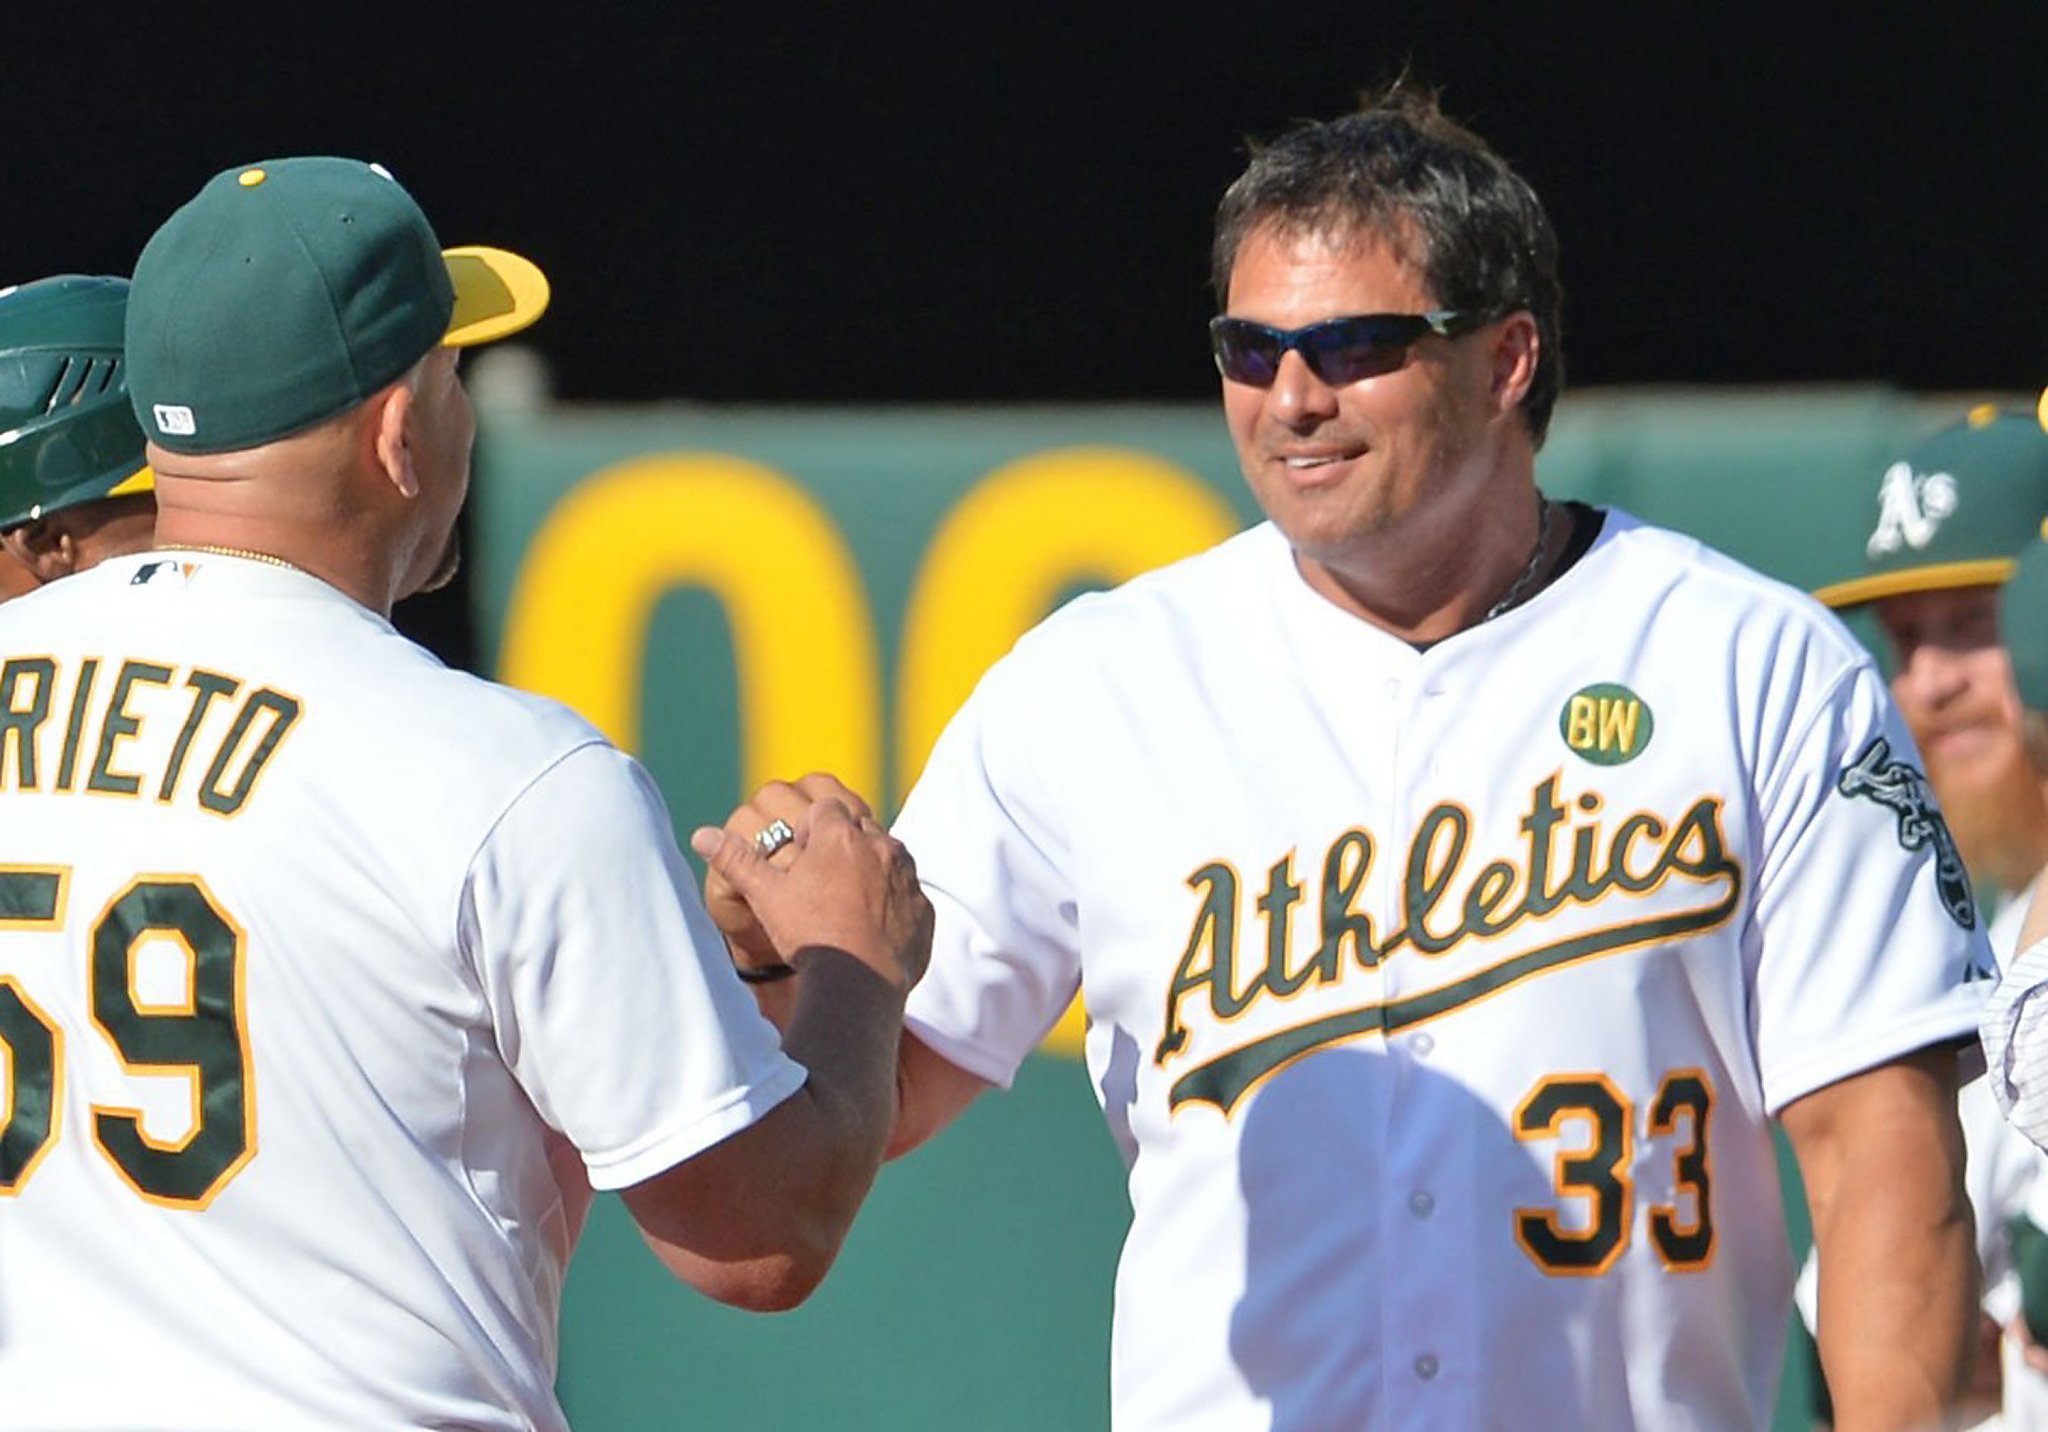 NBCSCA parts ways with Jose Canseco after A's condemn his tweets